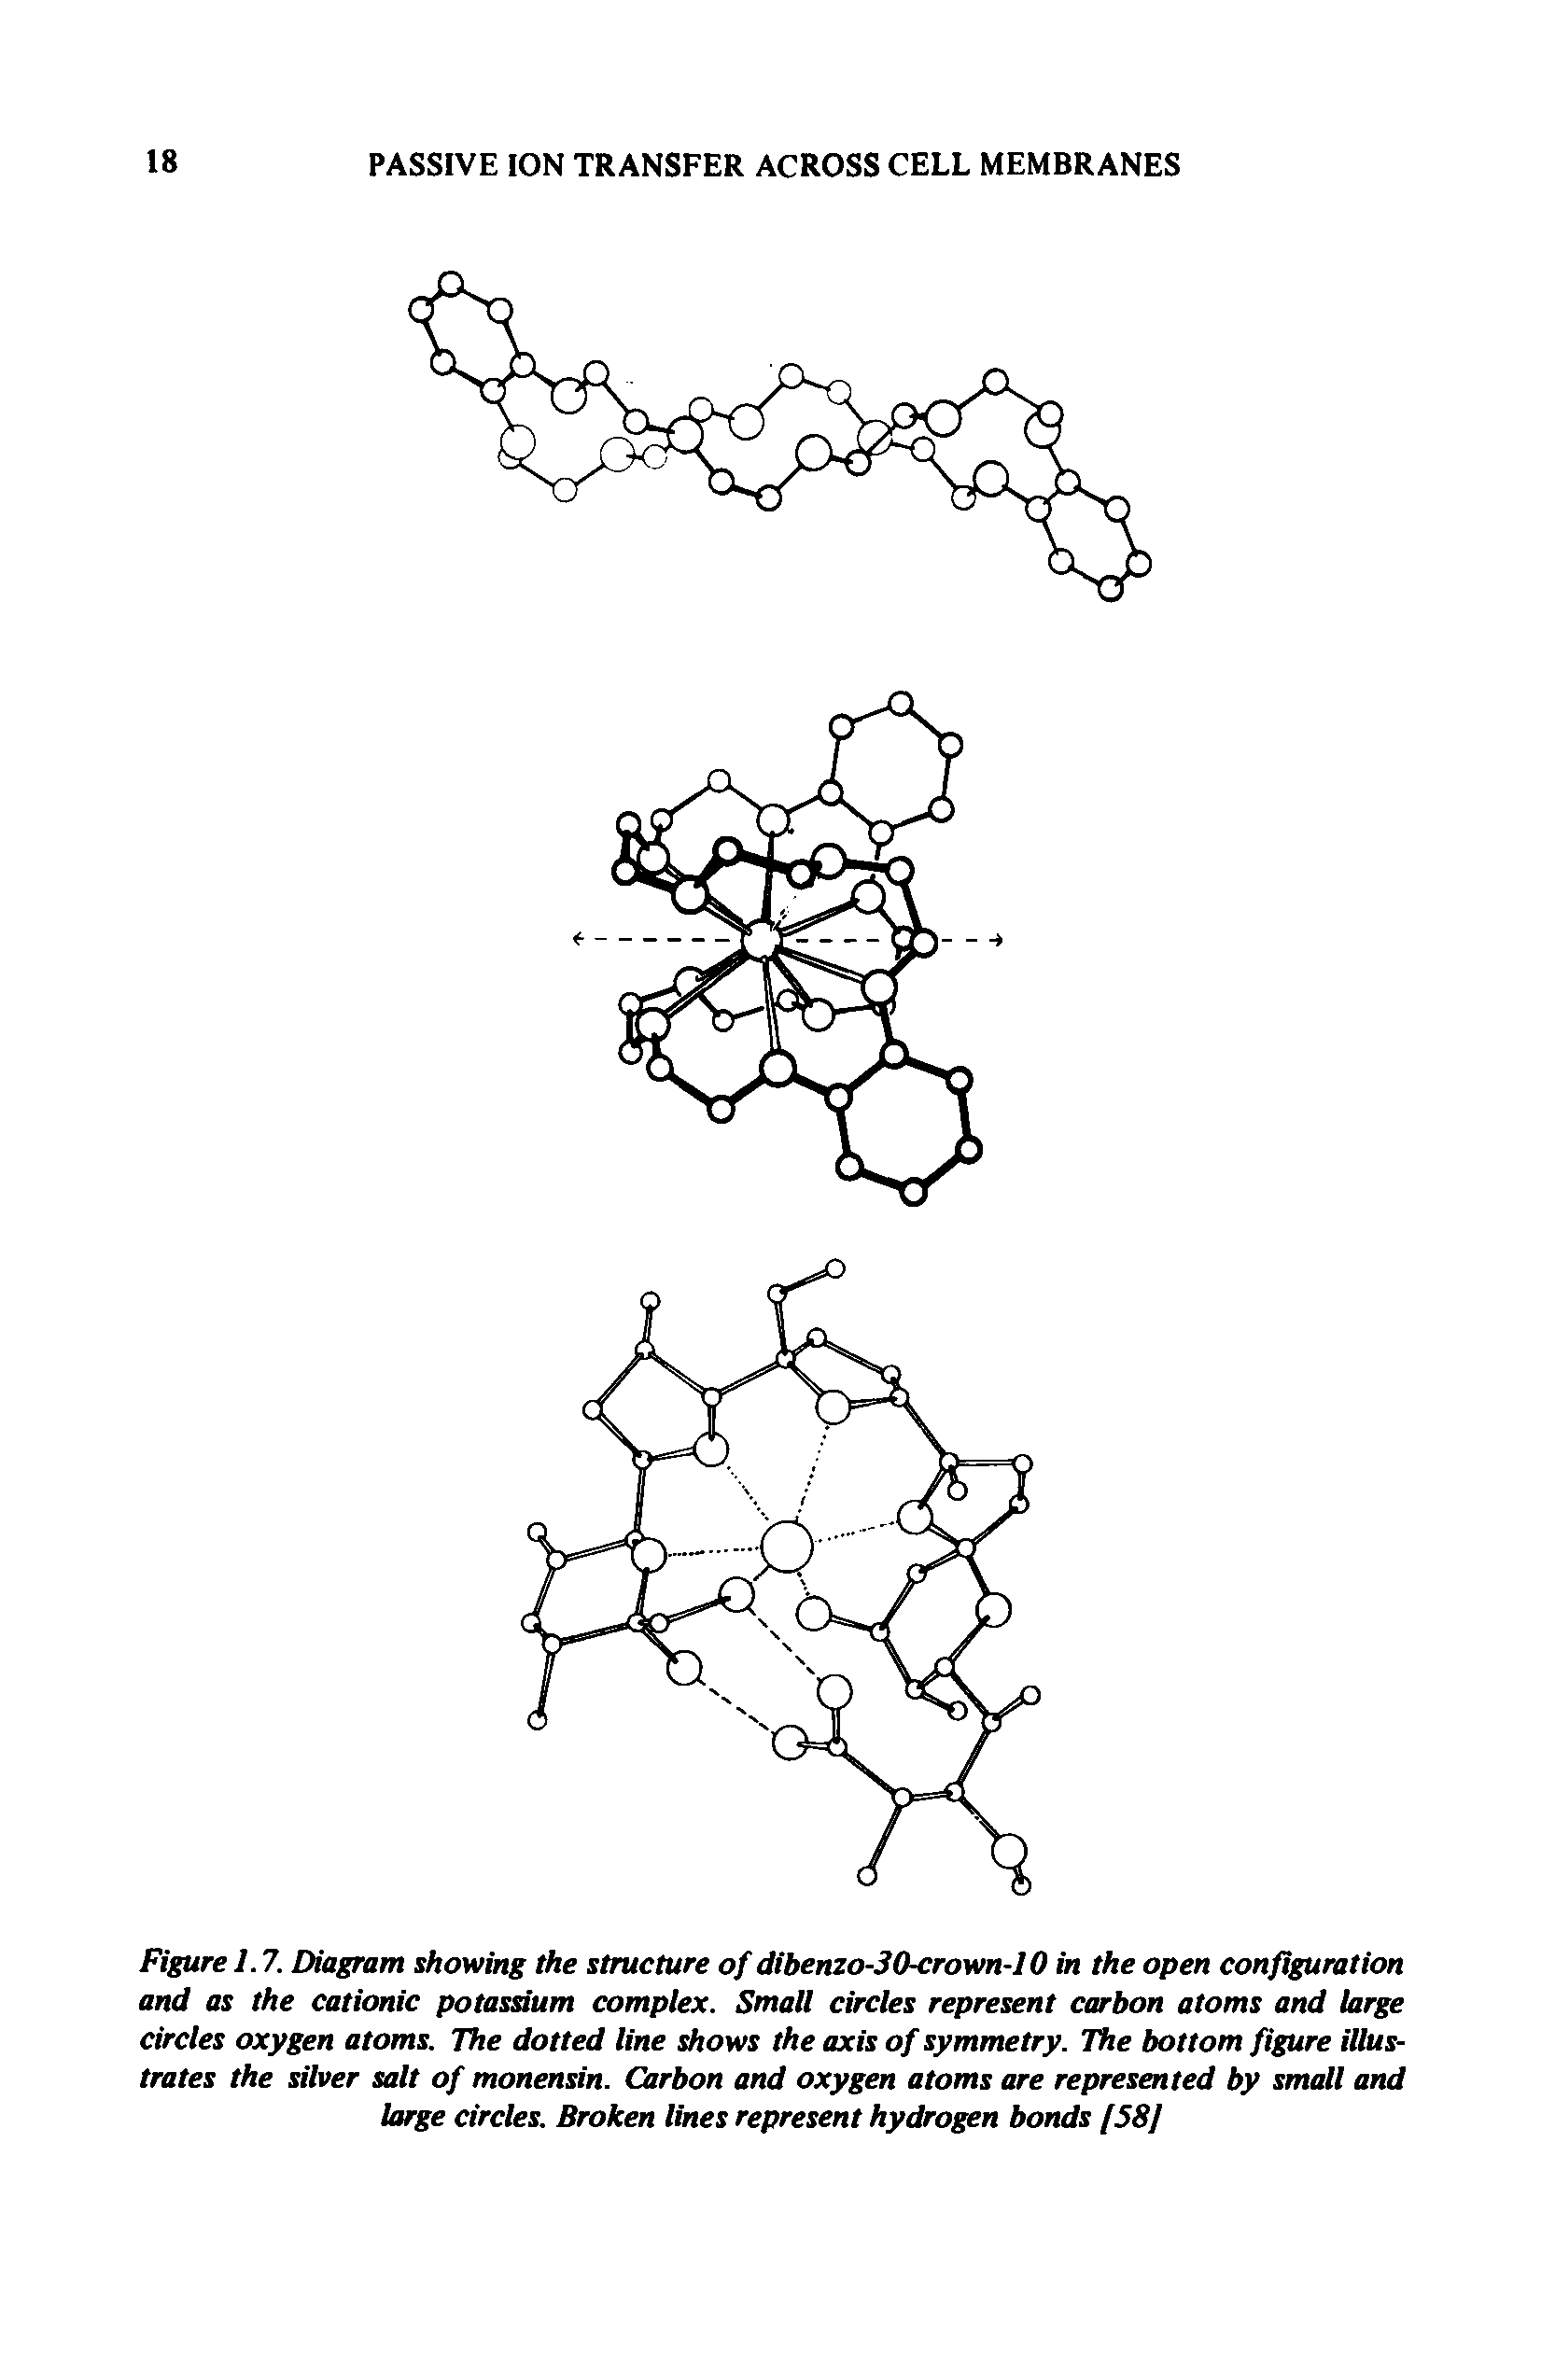 Figure 1.7. Diagram showir the structure of dibenzo-30<roym-I0 in the open configuration and as the cationic potassium complex. Small circles represent carbon atoms and large circles oxygen atoms. The dotted line shows the axis of symmetry. The bottom figure illustrates the silver salt of monensin. Carbon and oxygen atoms are represented by small and large circles. Broken lines represent hydrogen bonds [SSJ...